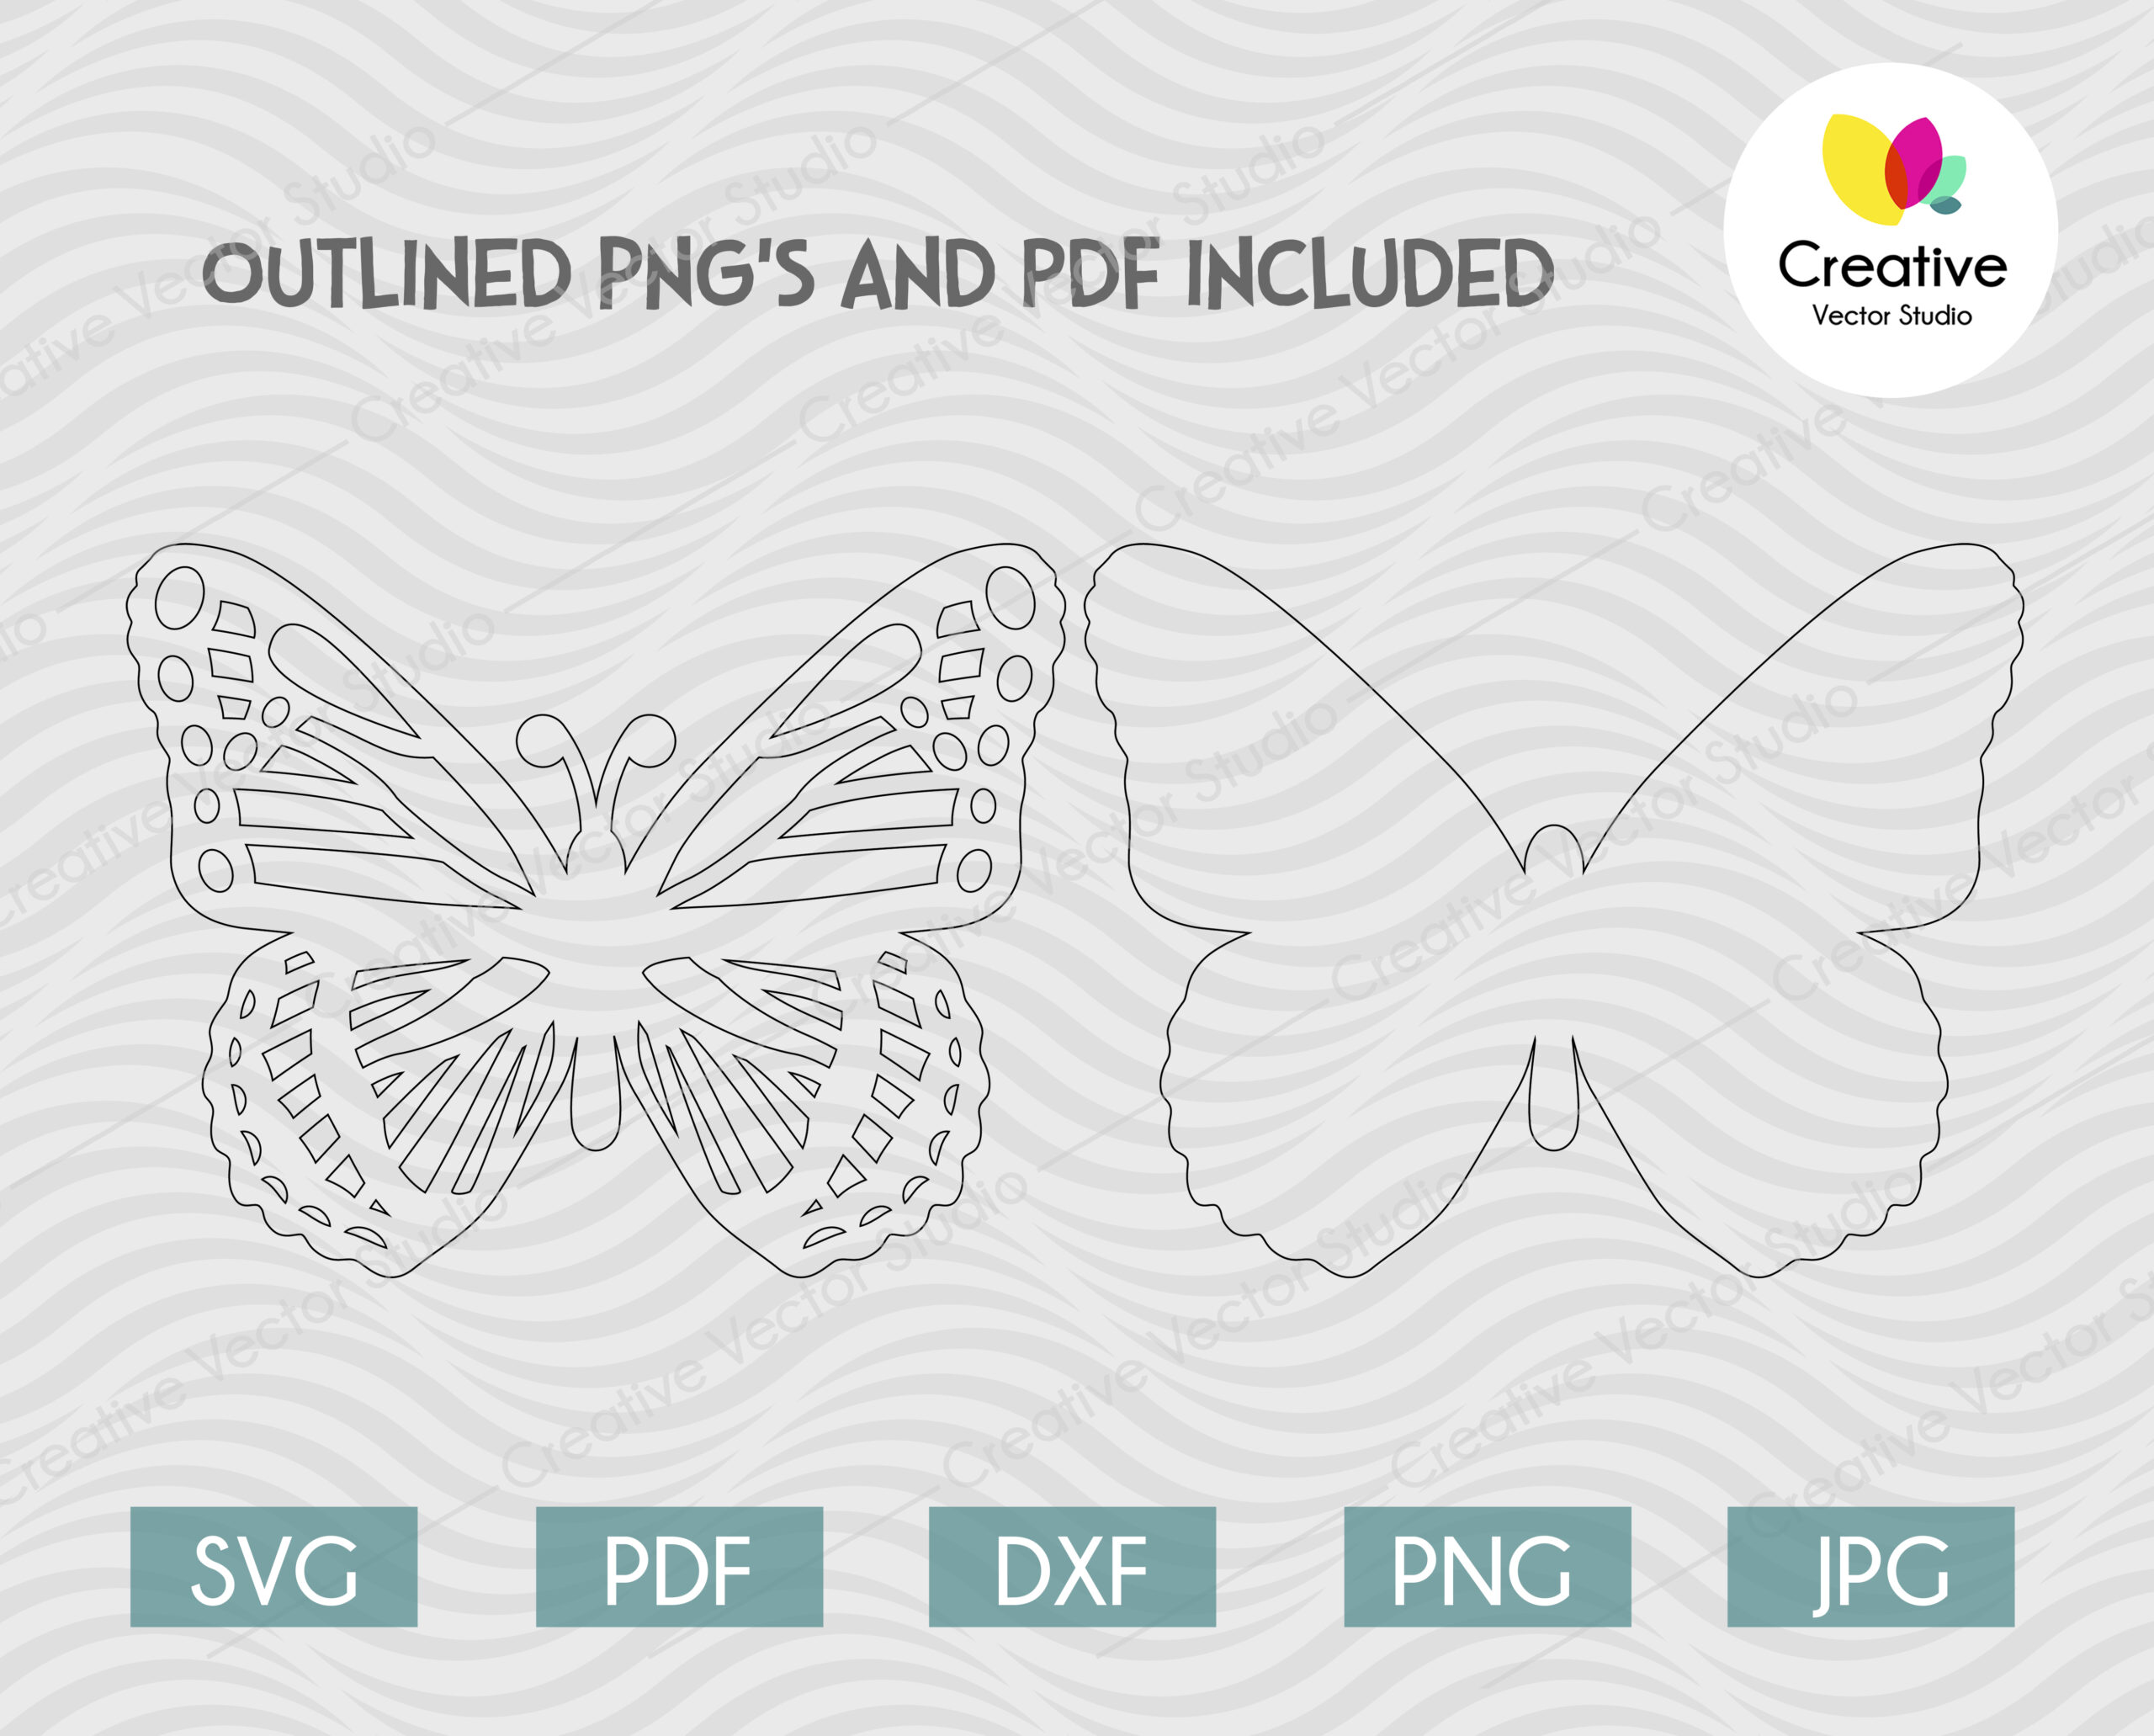 Download 3d Butterfly Svg 1 Cutting Template Creative Vector Studio